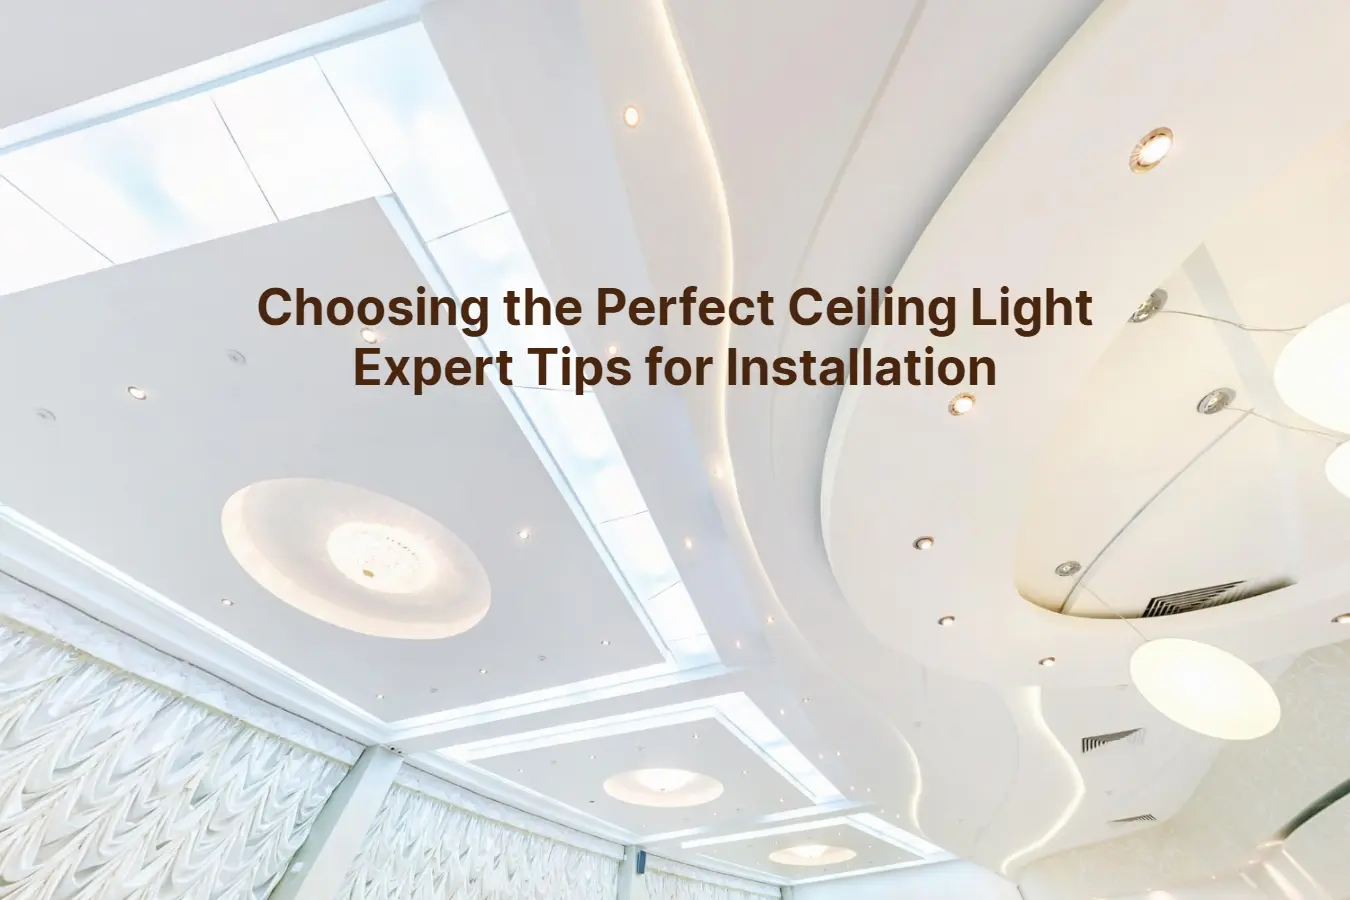 Choosing the Perfect Ceiling Light Expert Tips for Installation